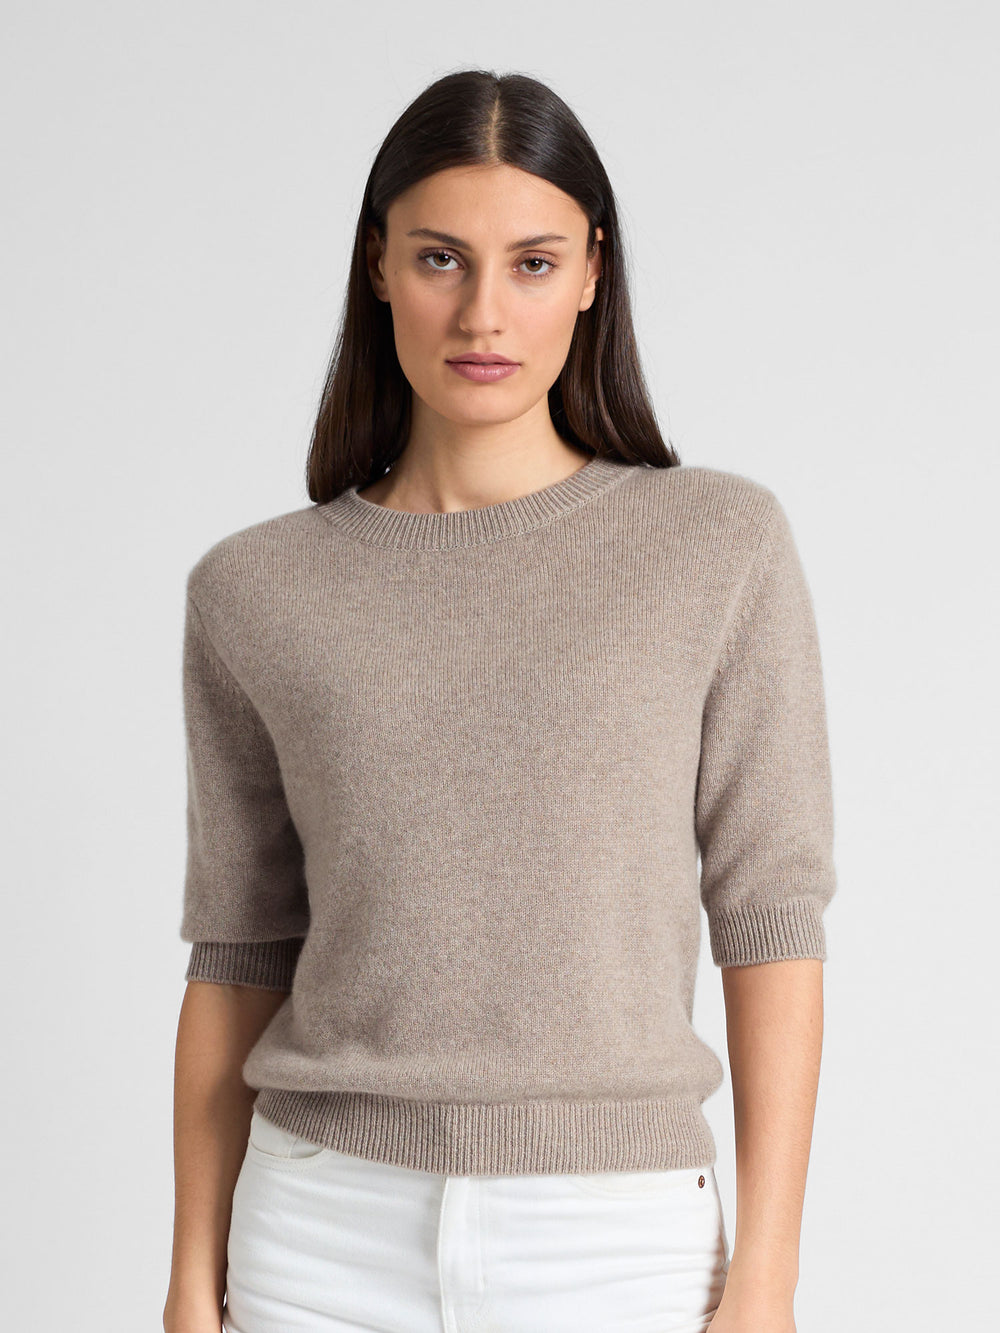 Short sleeved cashmere sweater "Aase" in 100% pure cashmere. Scandinavian design by Kashmina. Color: Toast.